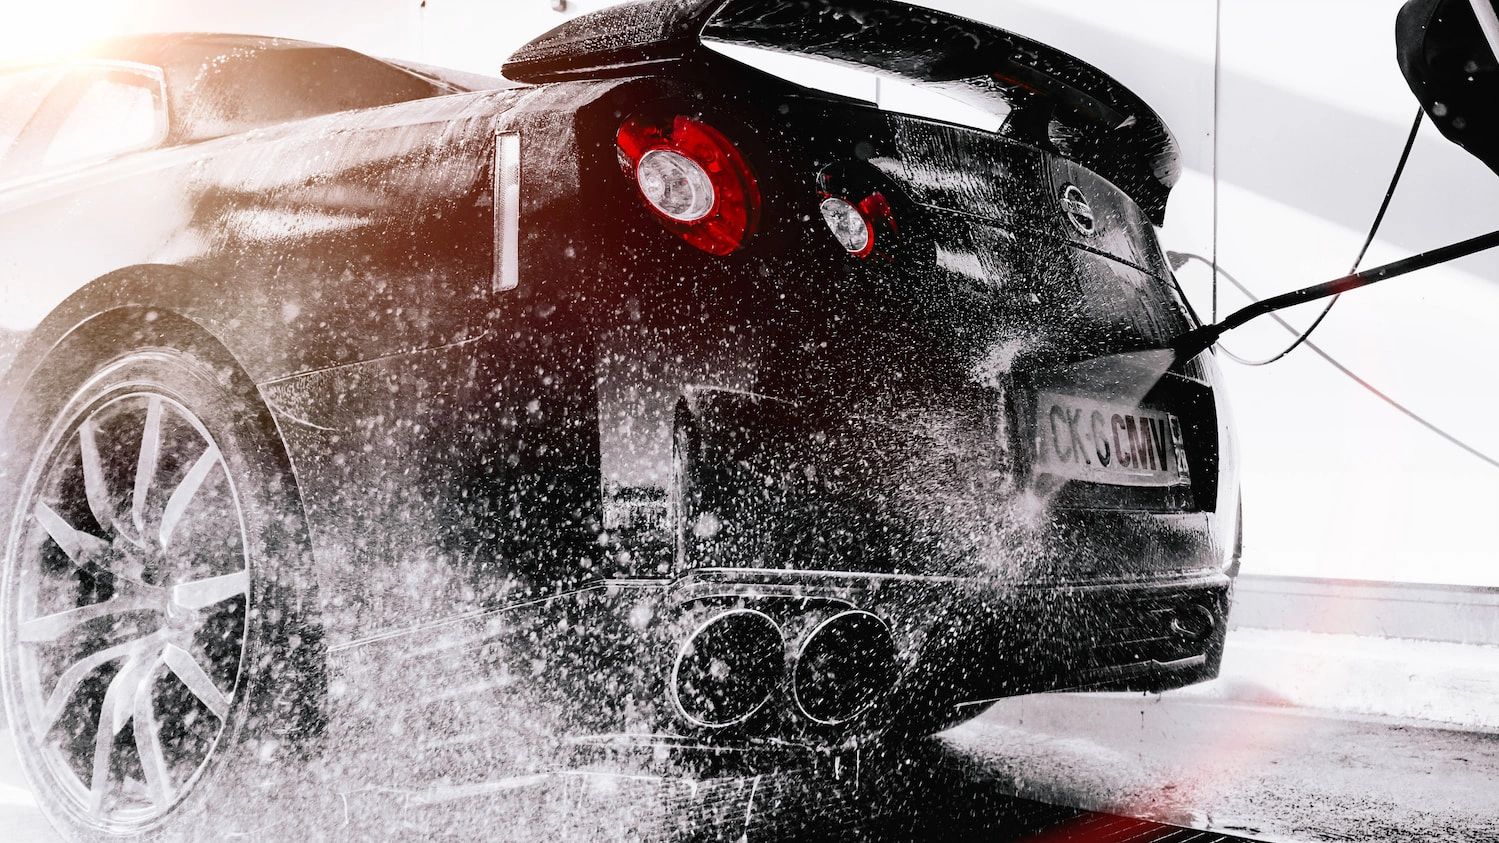 Photo - Black Nissan GTR being washed